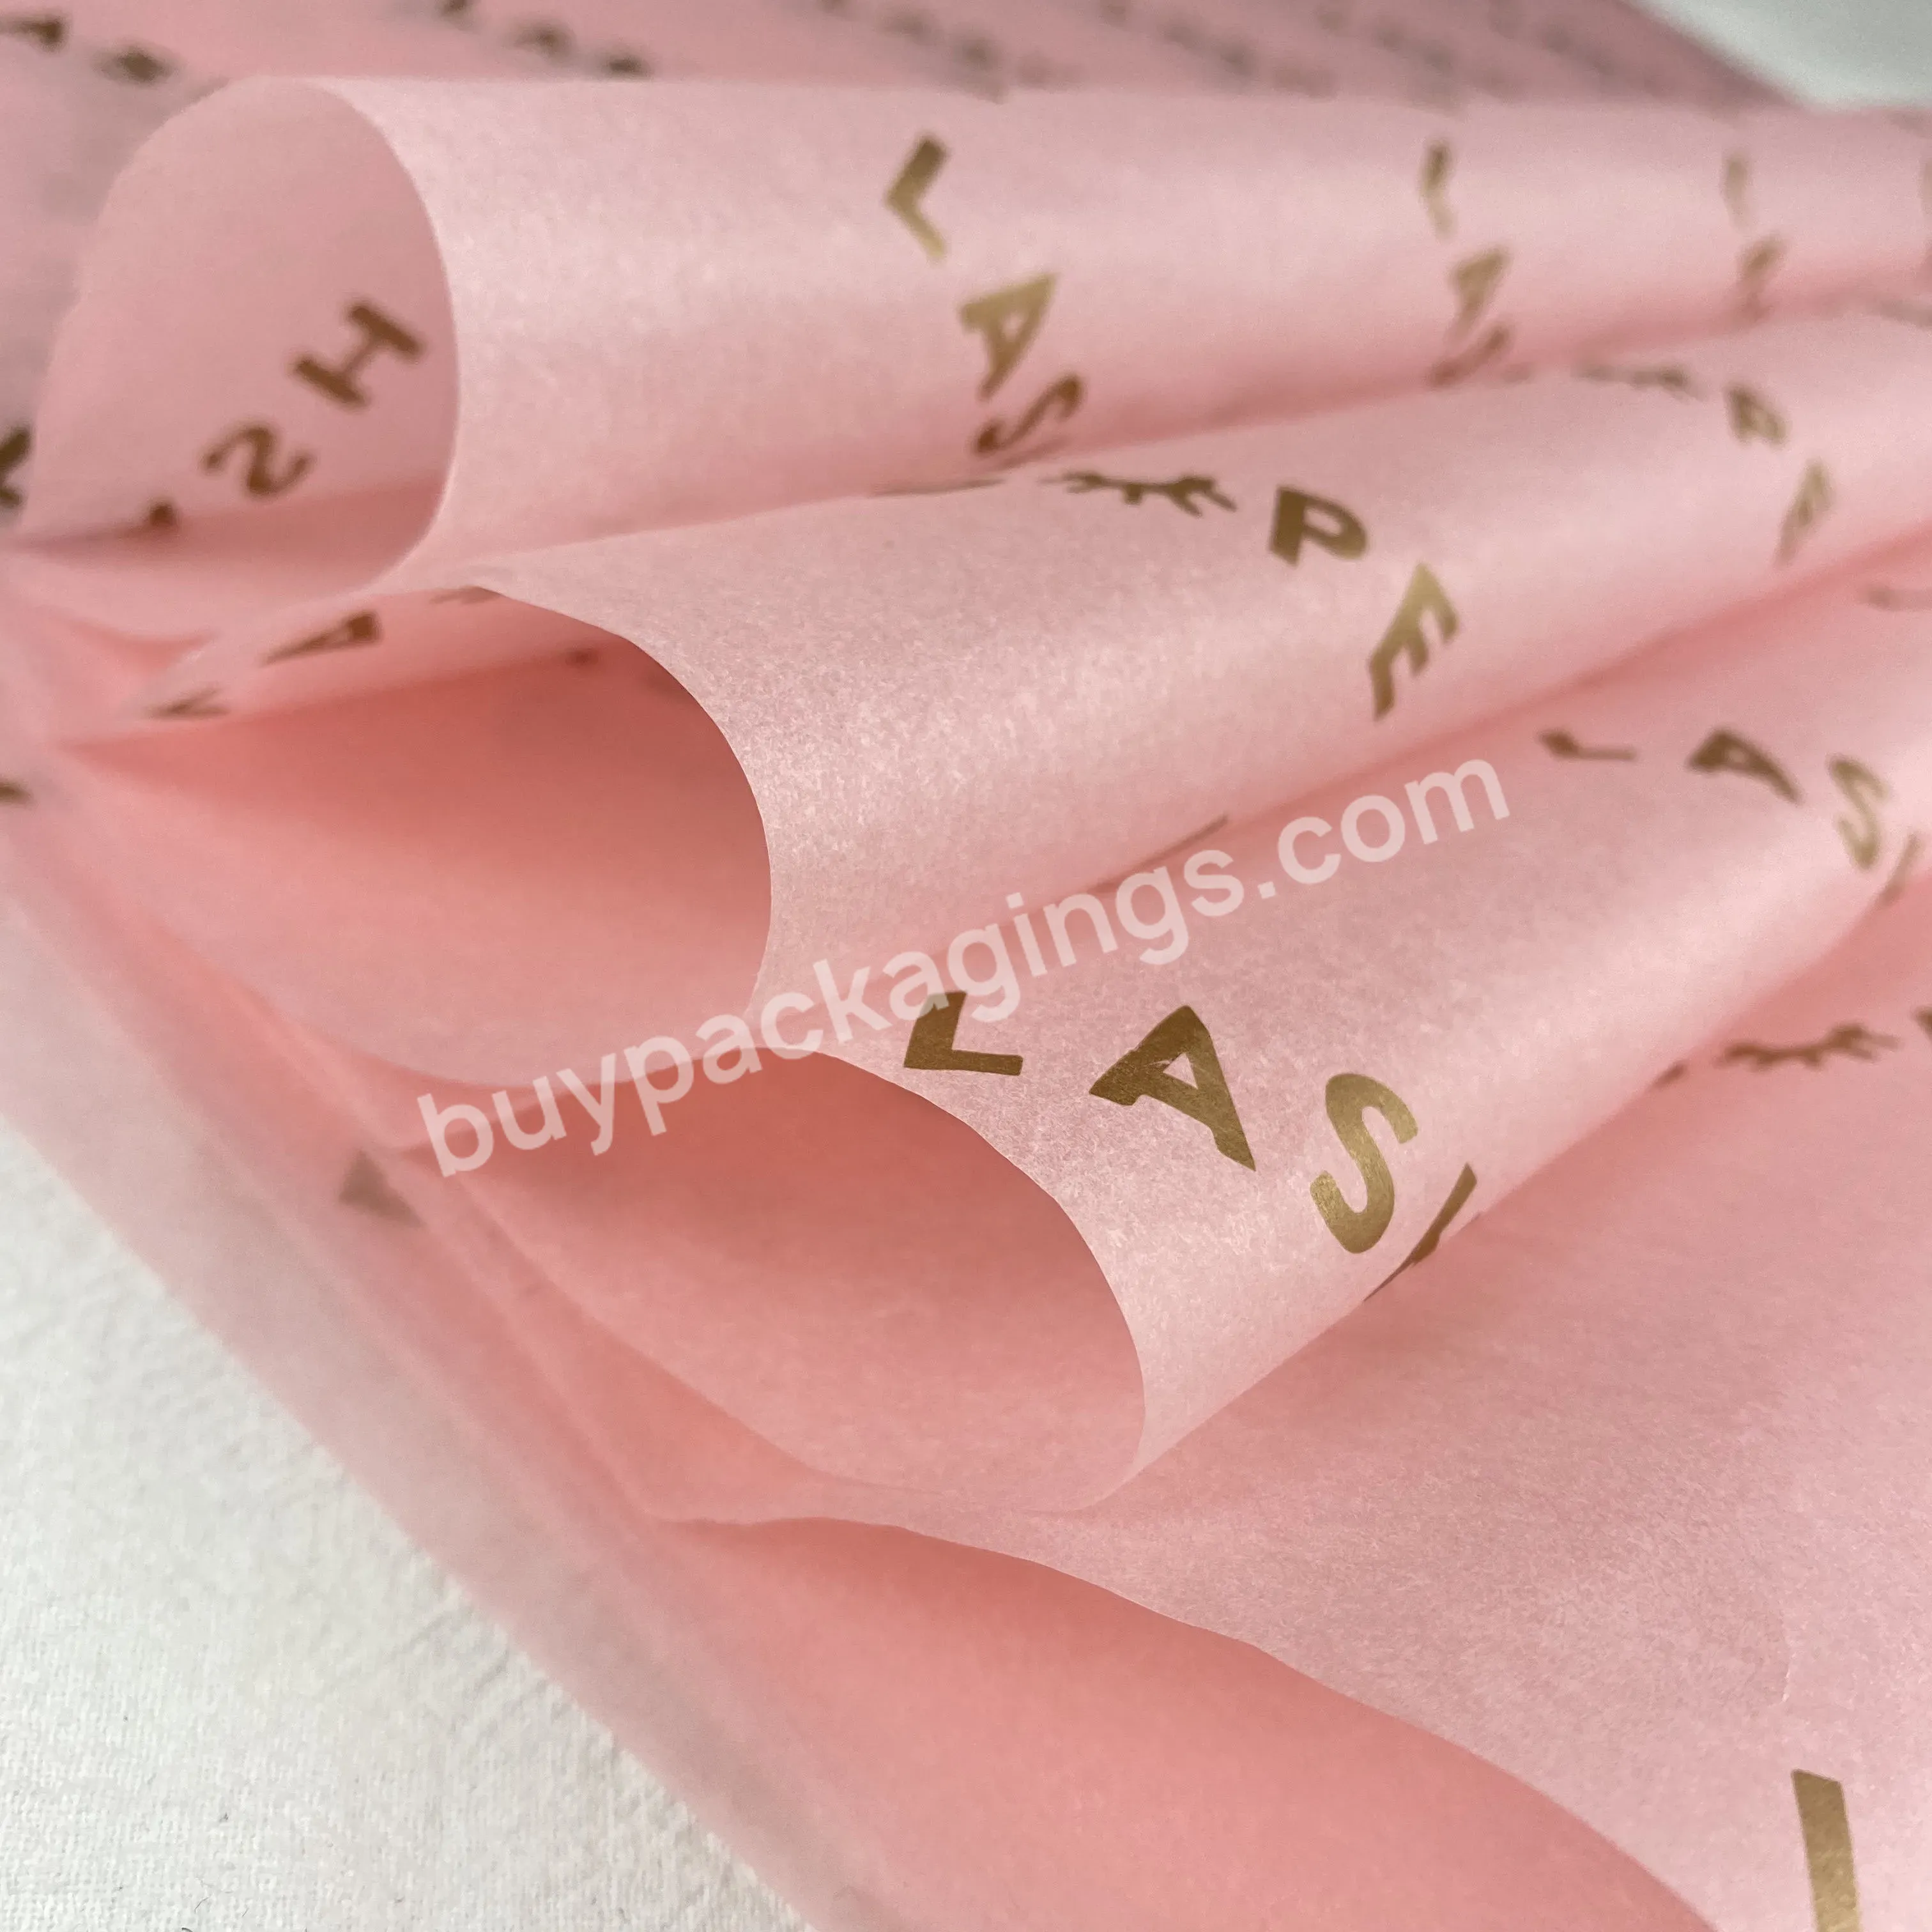 Print Logo Printable Gift Wrap Paper Gift Wrapping Paper Bags Hemp Wraps Blunt Paper With Pink Desgin - Buy Printable Gift Wrap Paper,Gift Wrapping Paper Bags,Hemp Wraps Blunt Paper.